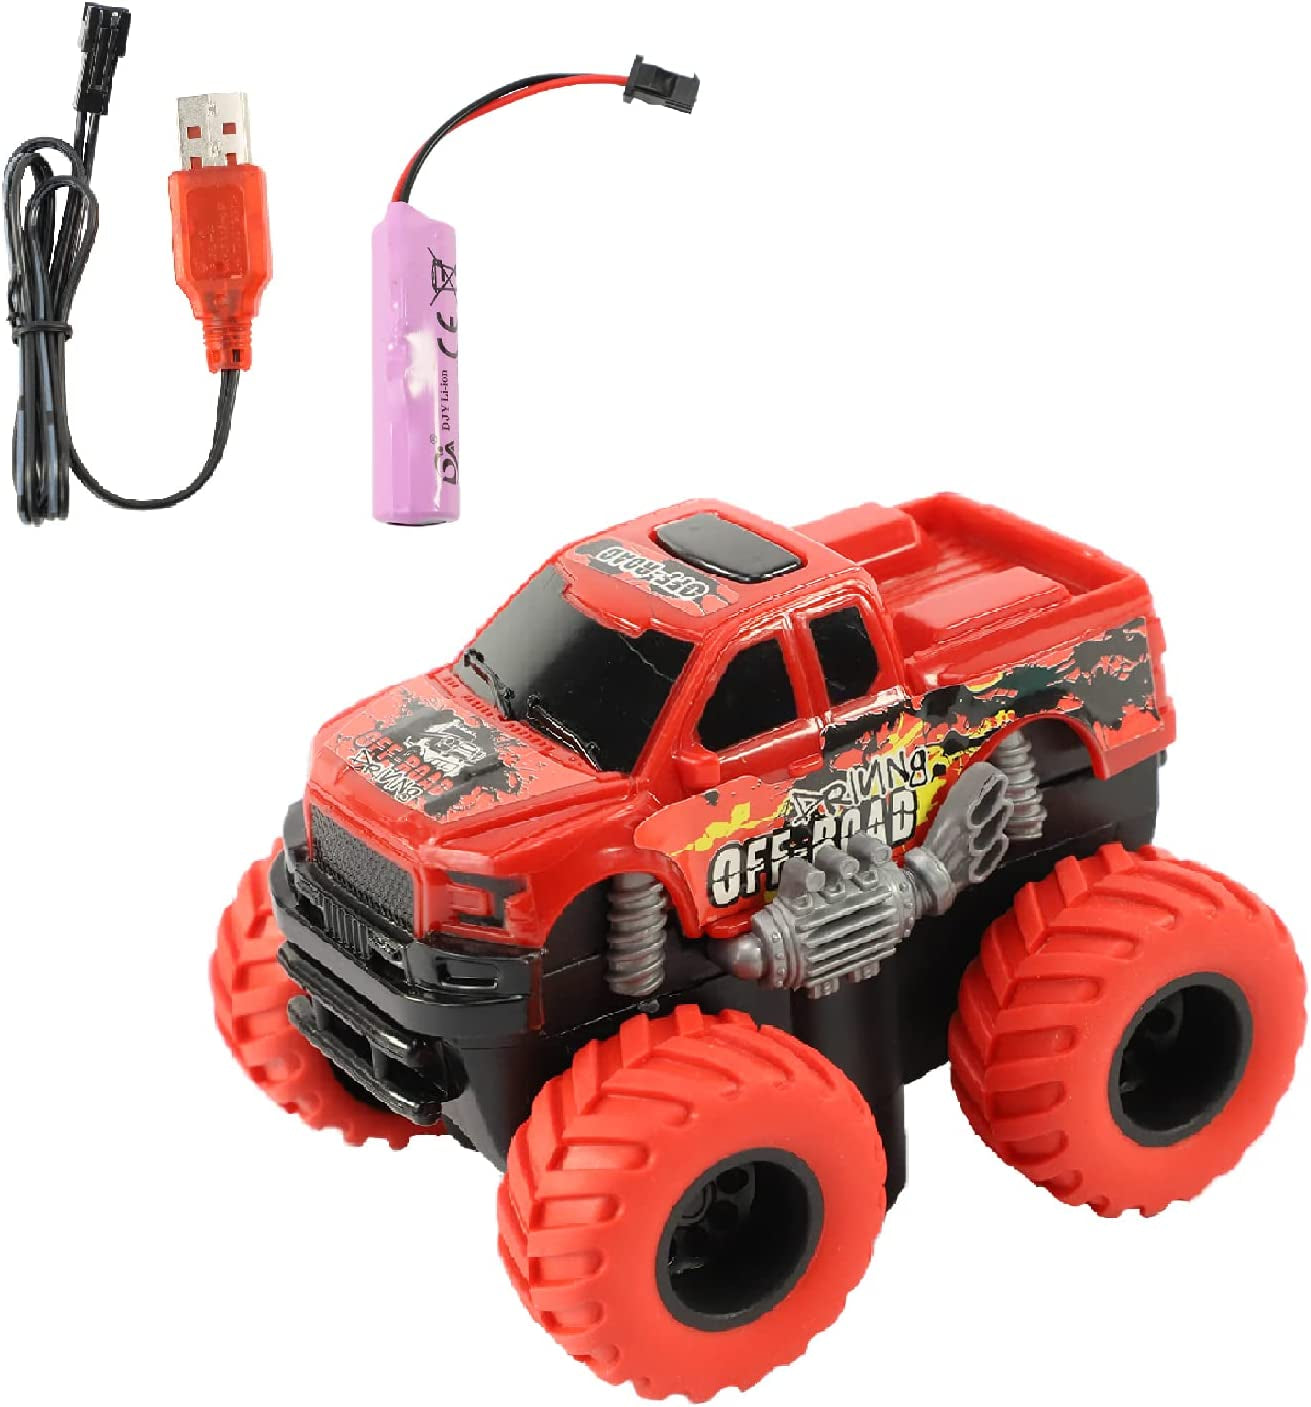 Tracks Truck Replacement Only, Light up Magic Cars for Tracks Compatible with Glow in the Dark (Red Truck)